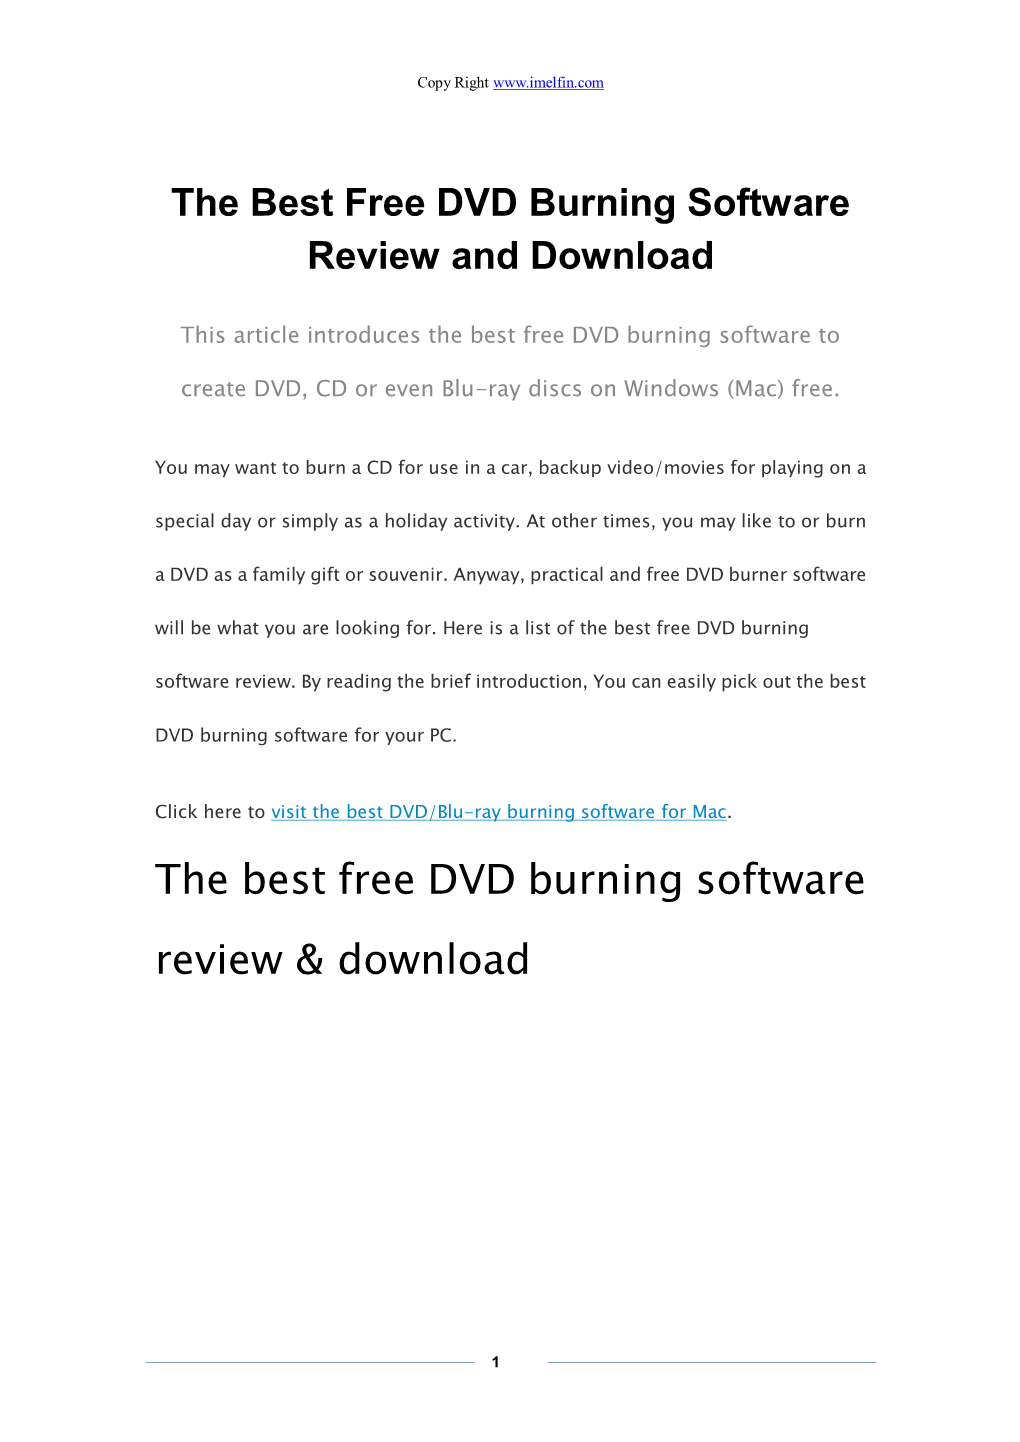 The Best Free DVD Burning Software Review & Download